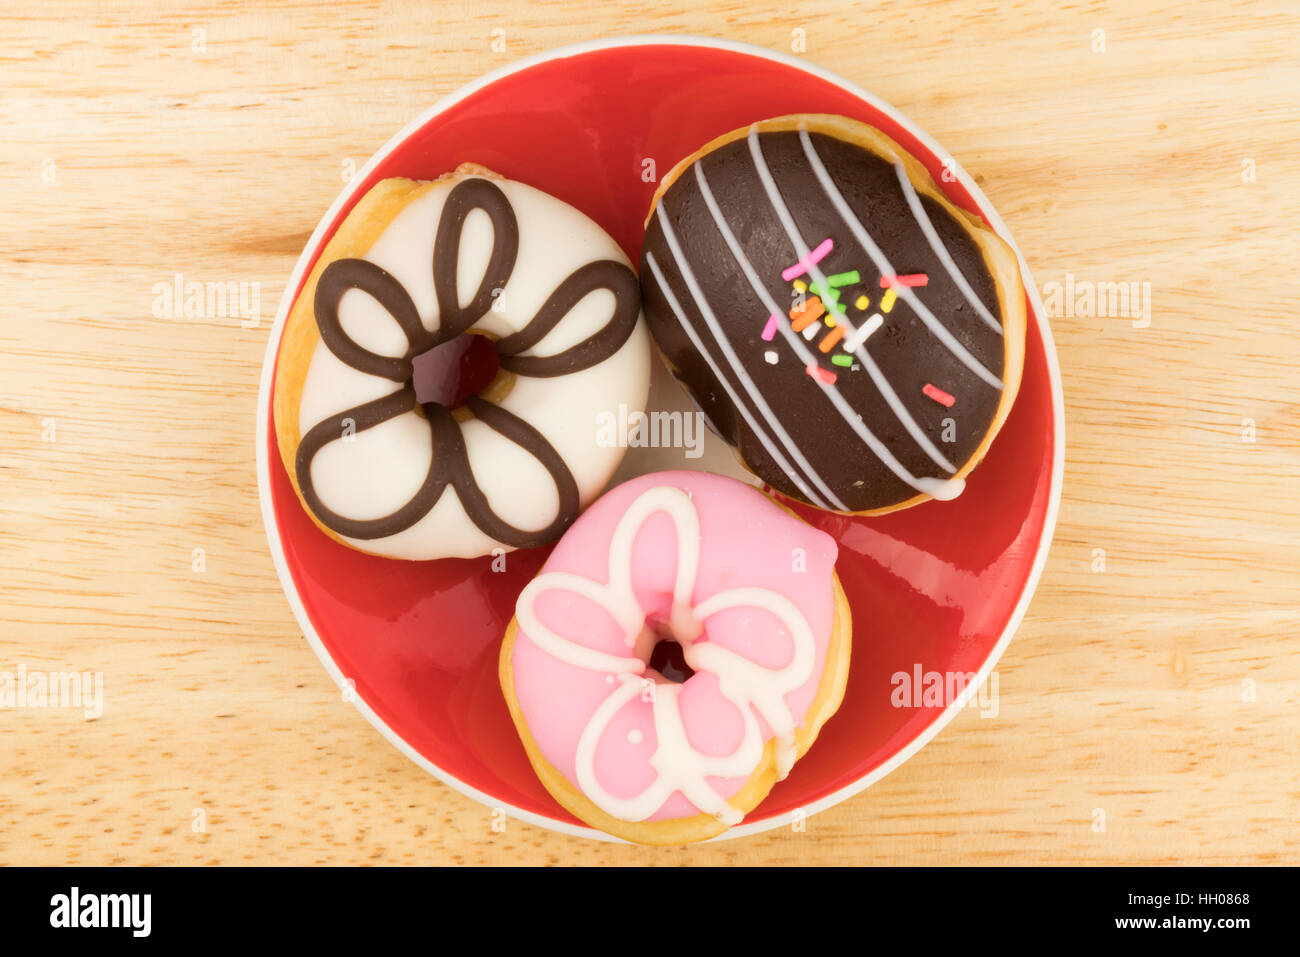 Tasty doughnuts in red plate on wooden board Stock Photo